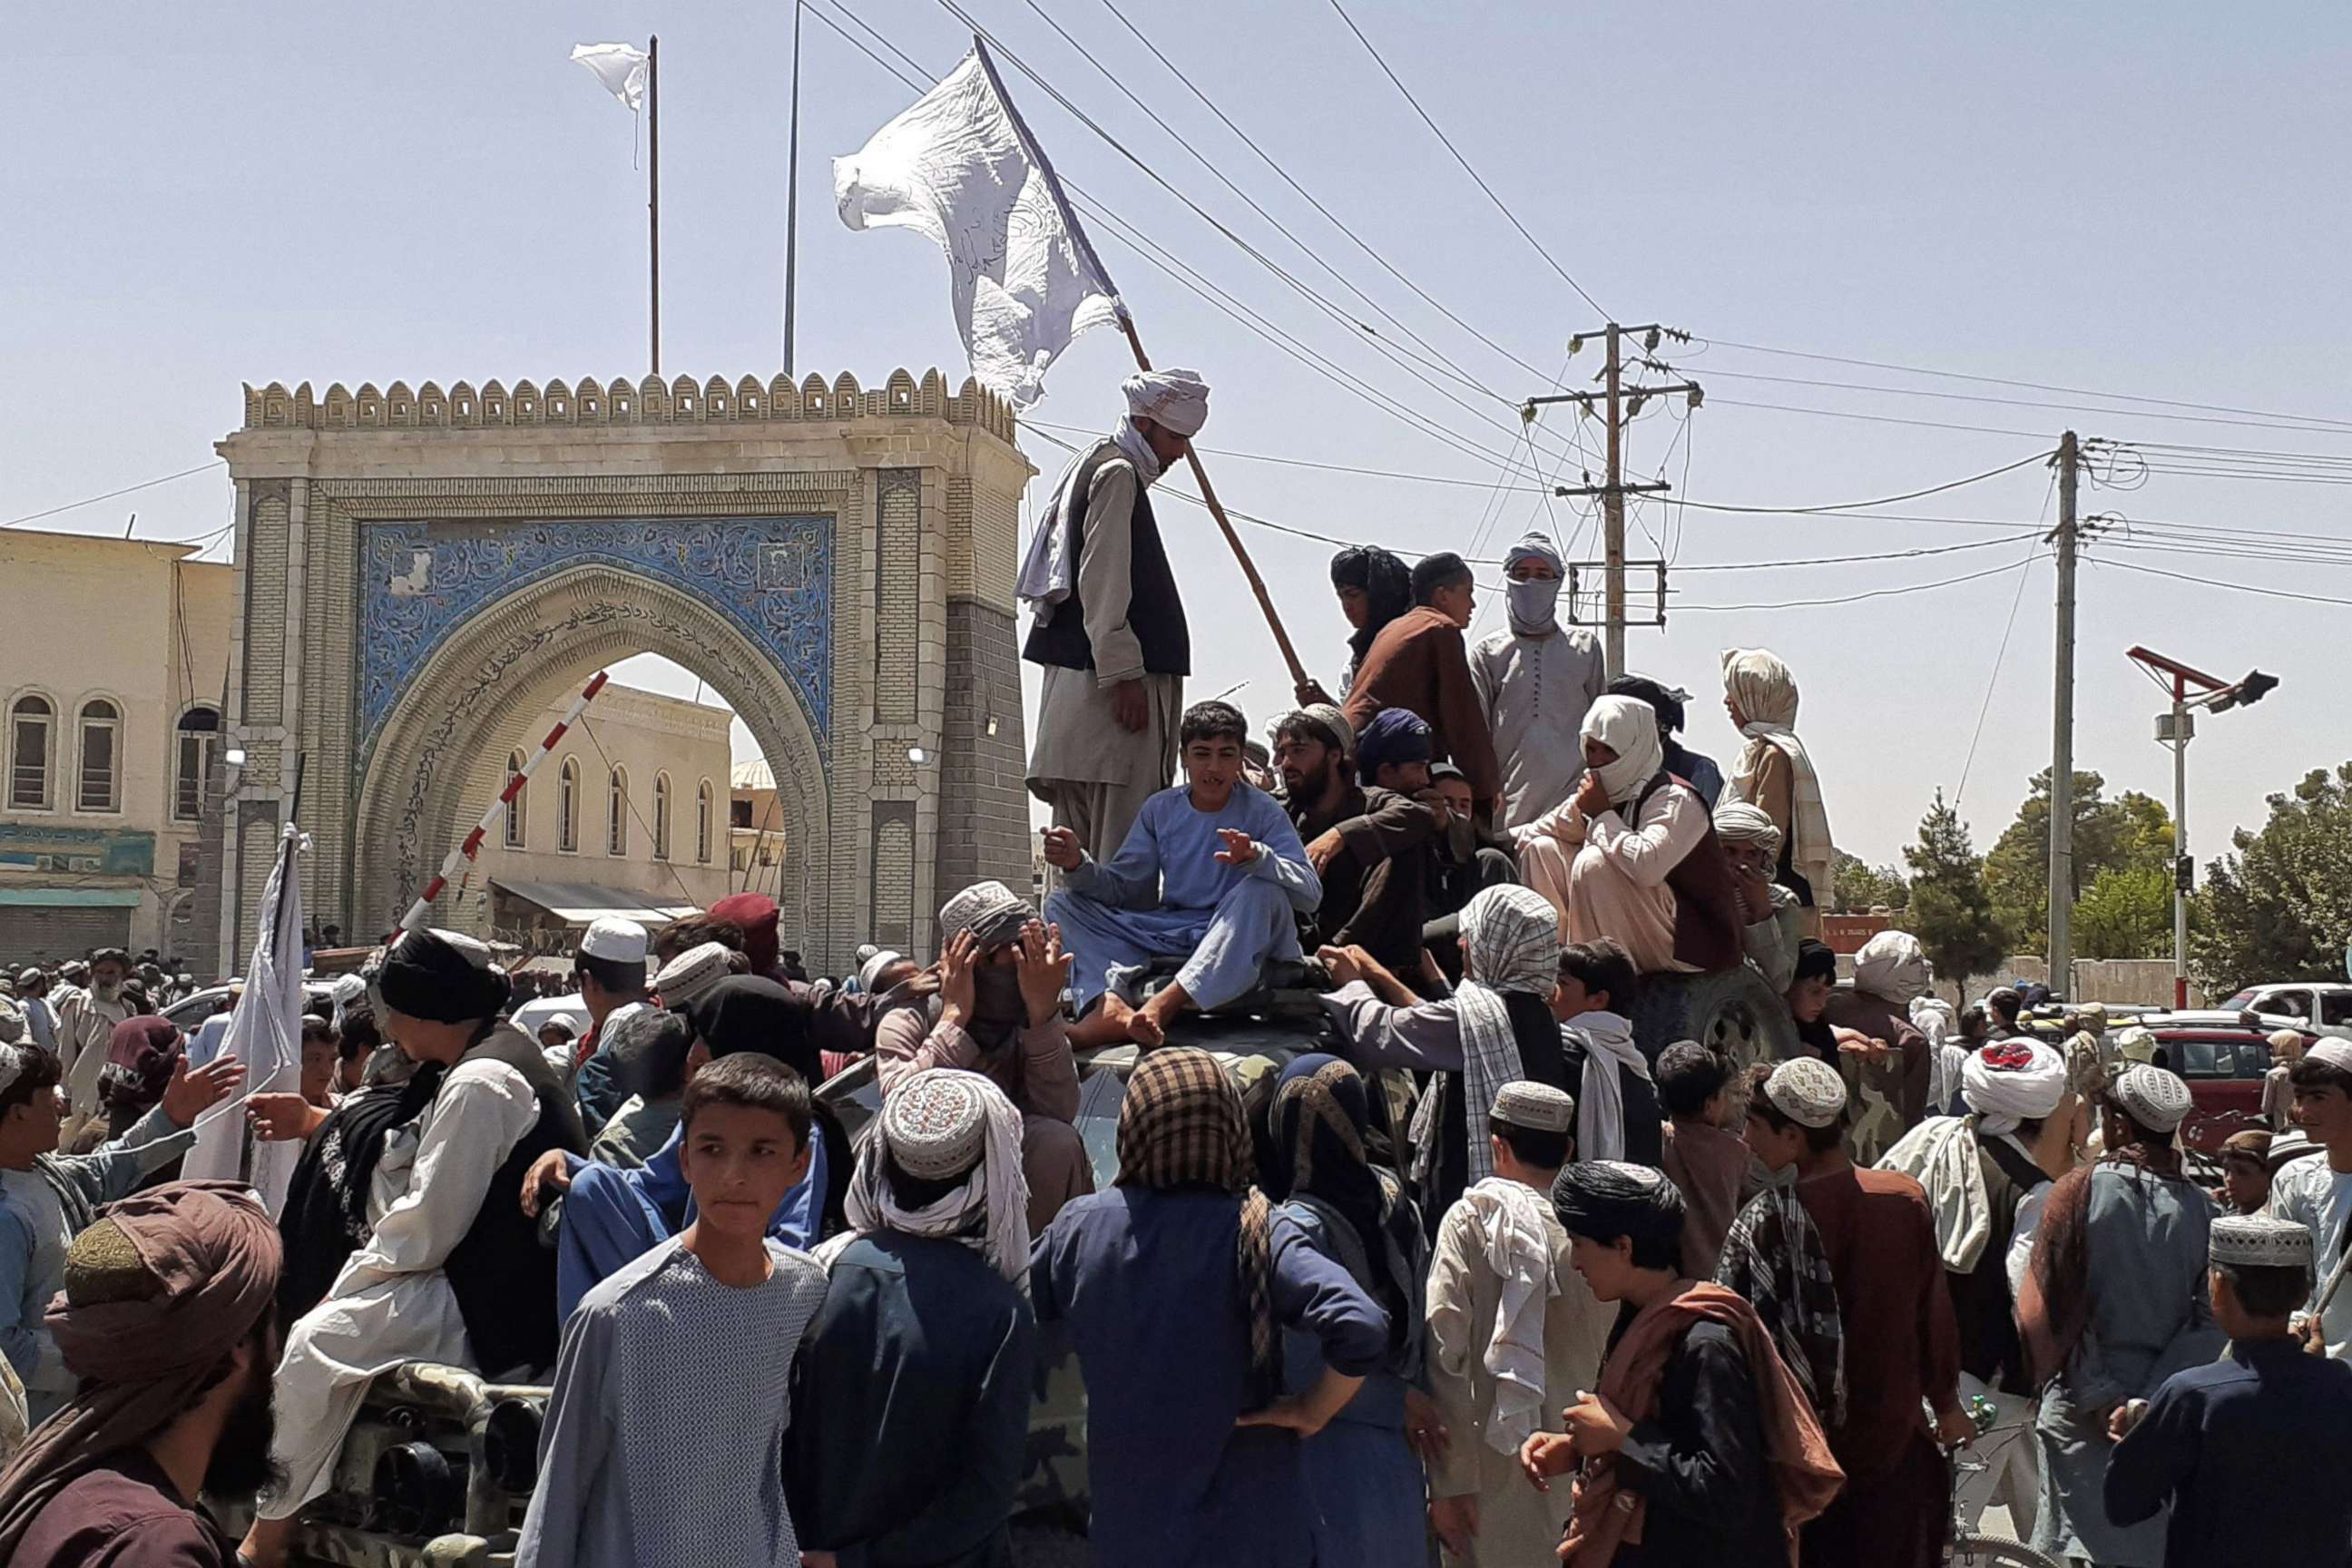 PHOTO: Taliban fighters stand on a vehicle along the roadside in Kandahar on Aug. 13, 2021.